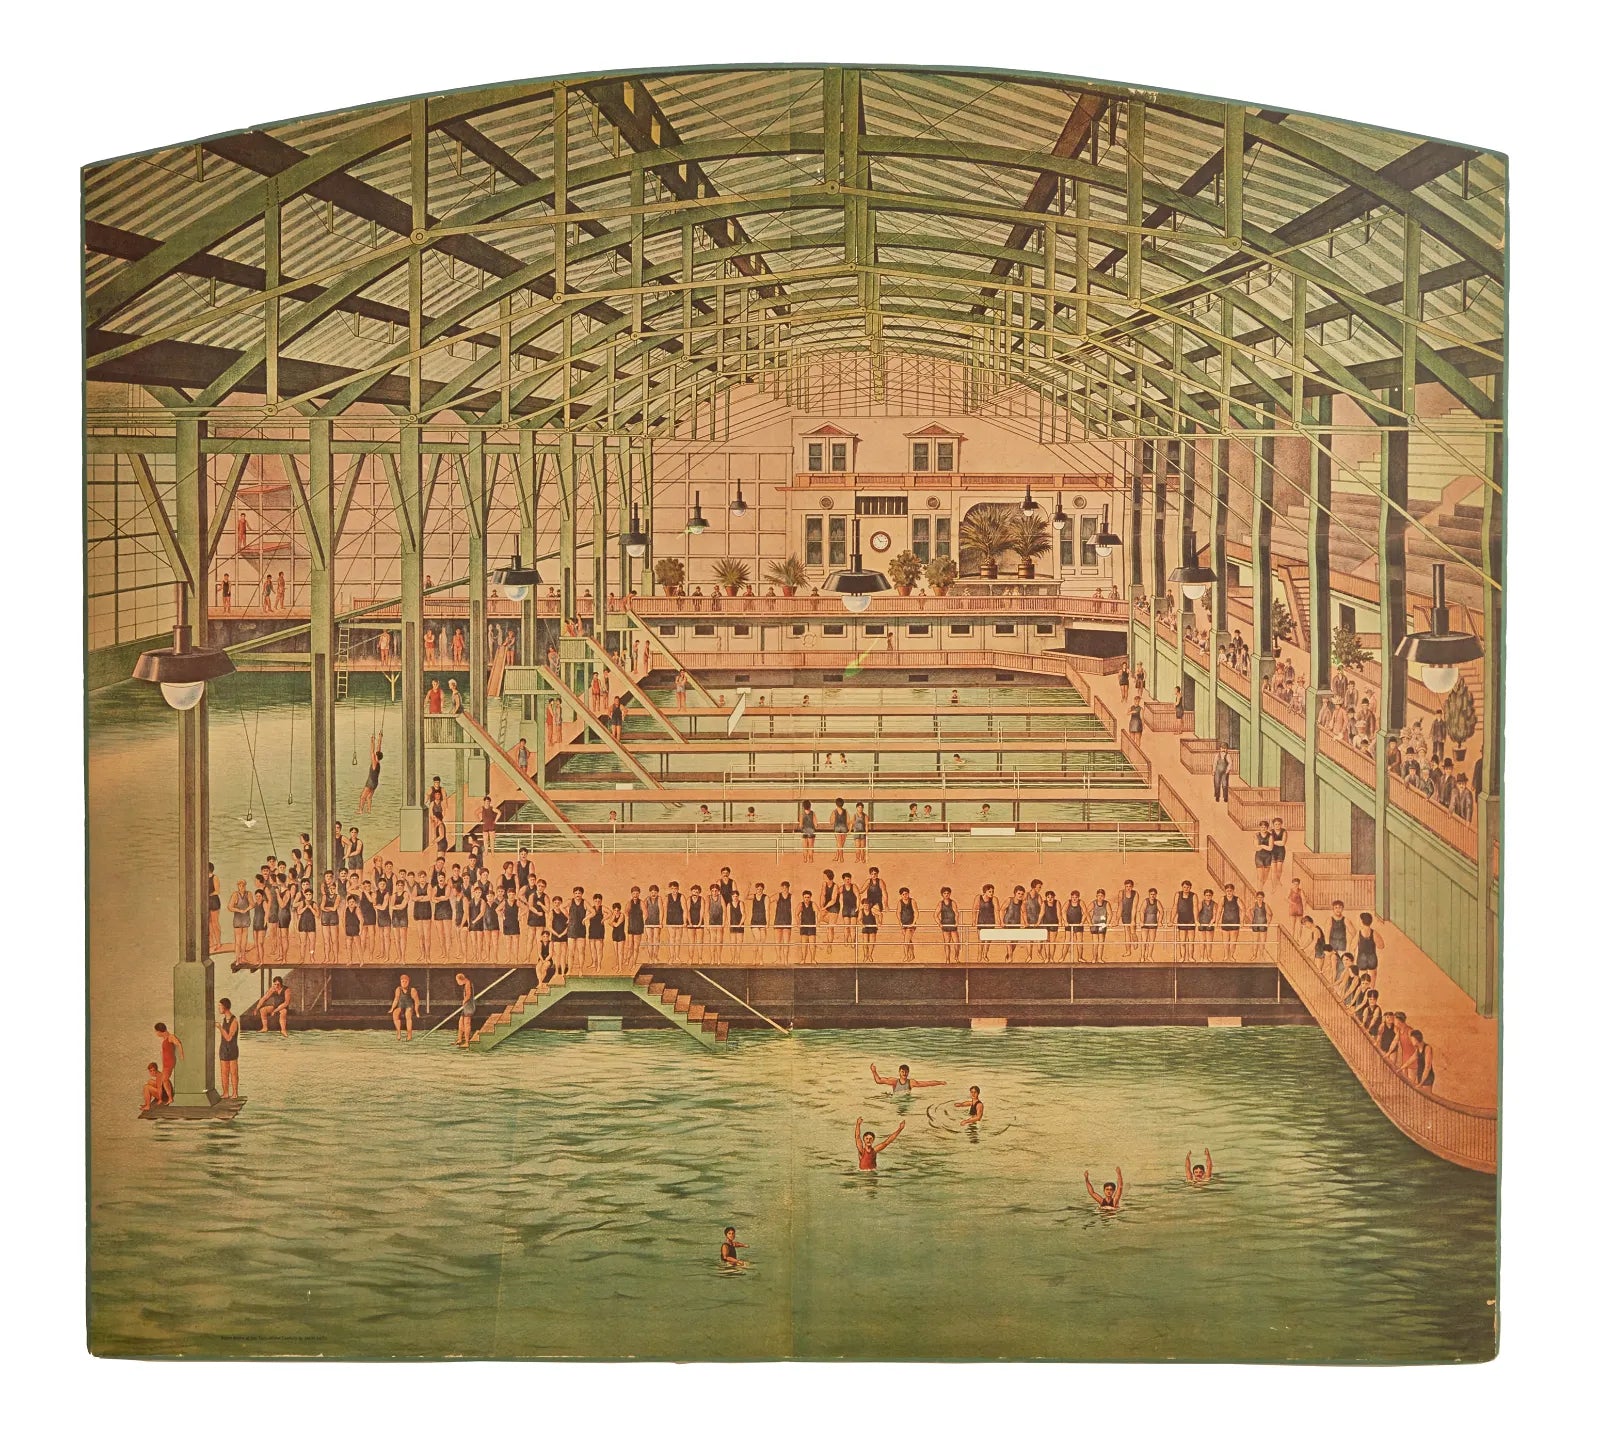 Circa 1970 Lithograph Laid to Board - The Sutro Baths at the turn of the 20th Century | Work of Man